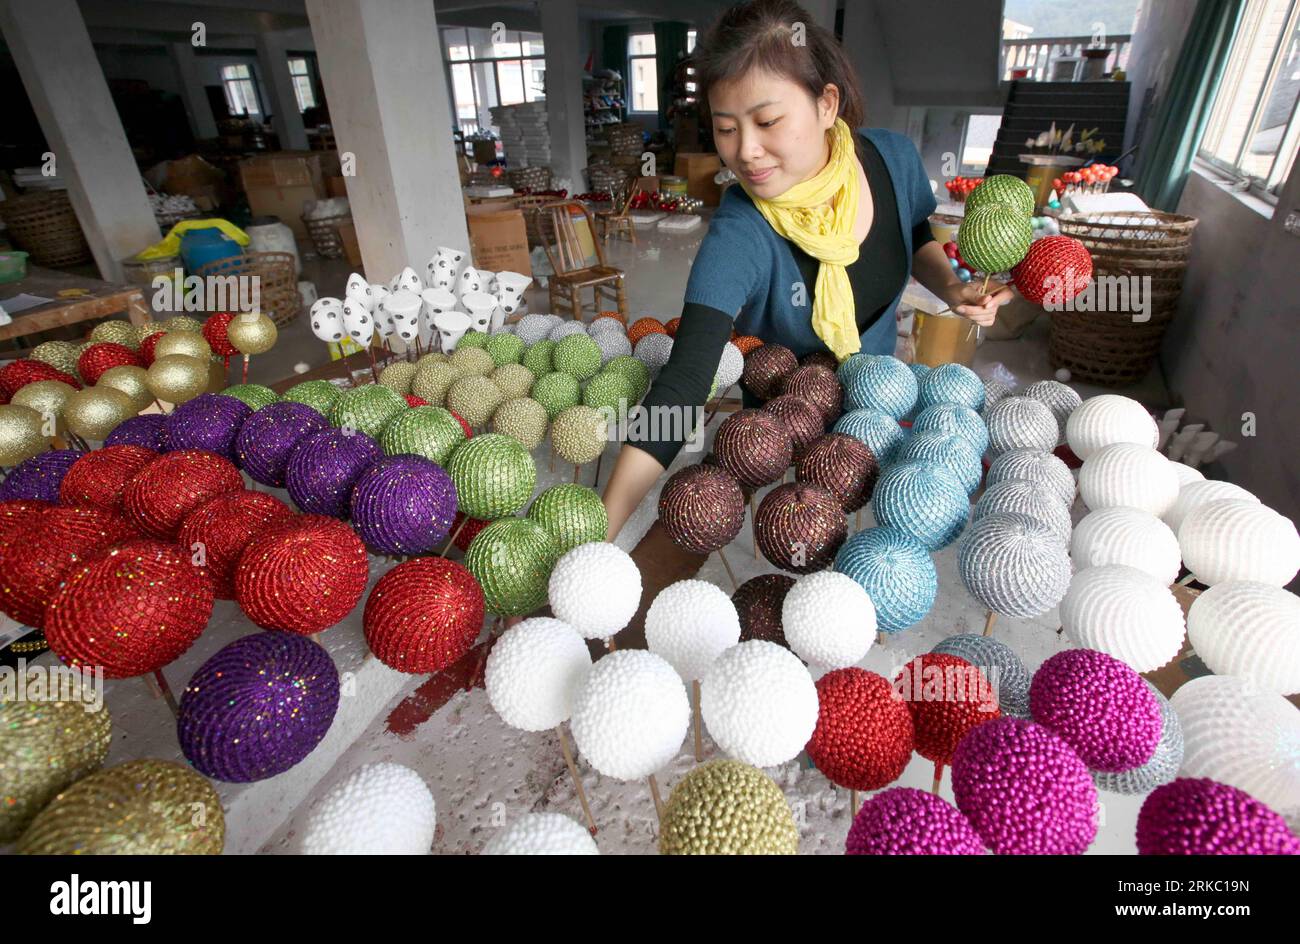 Bildnummer: 54638635  Datum: 12.11.2010  Copyright: imago/Xinhua (101115) -- WENZHOU, Nov. 15, 2010 (Xinhua) -- A manufacturer sorts newly designed Christmas ornaments in Ruian City of east China s Zhejiang Province, on Nov. 12, 2010. As the world gets ready to celebrate the West s biggest festival, Christmas, next month, Chinese toymakers are not so cheery, as the appreciation of Chinese currency Yuan crimps their already paper-thin profits. Around 80 percent of the world s Christmas toys, trees and decorations are churned out of factories in southern China. Despite the huge market share, Chi Stock Photo